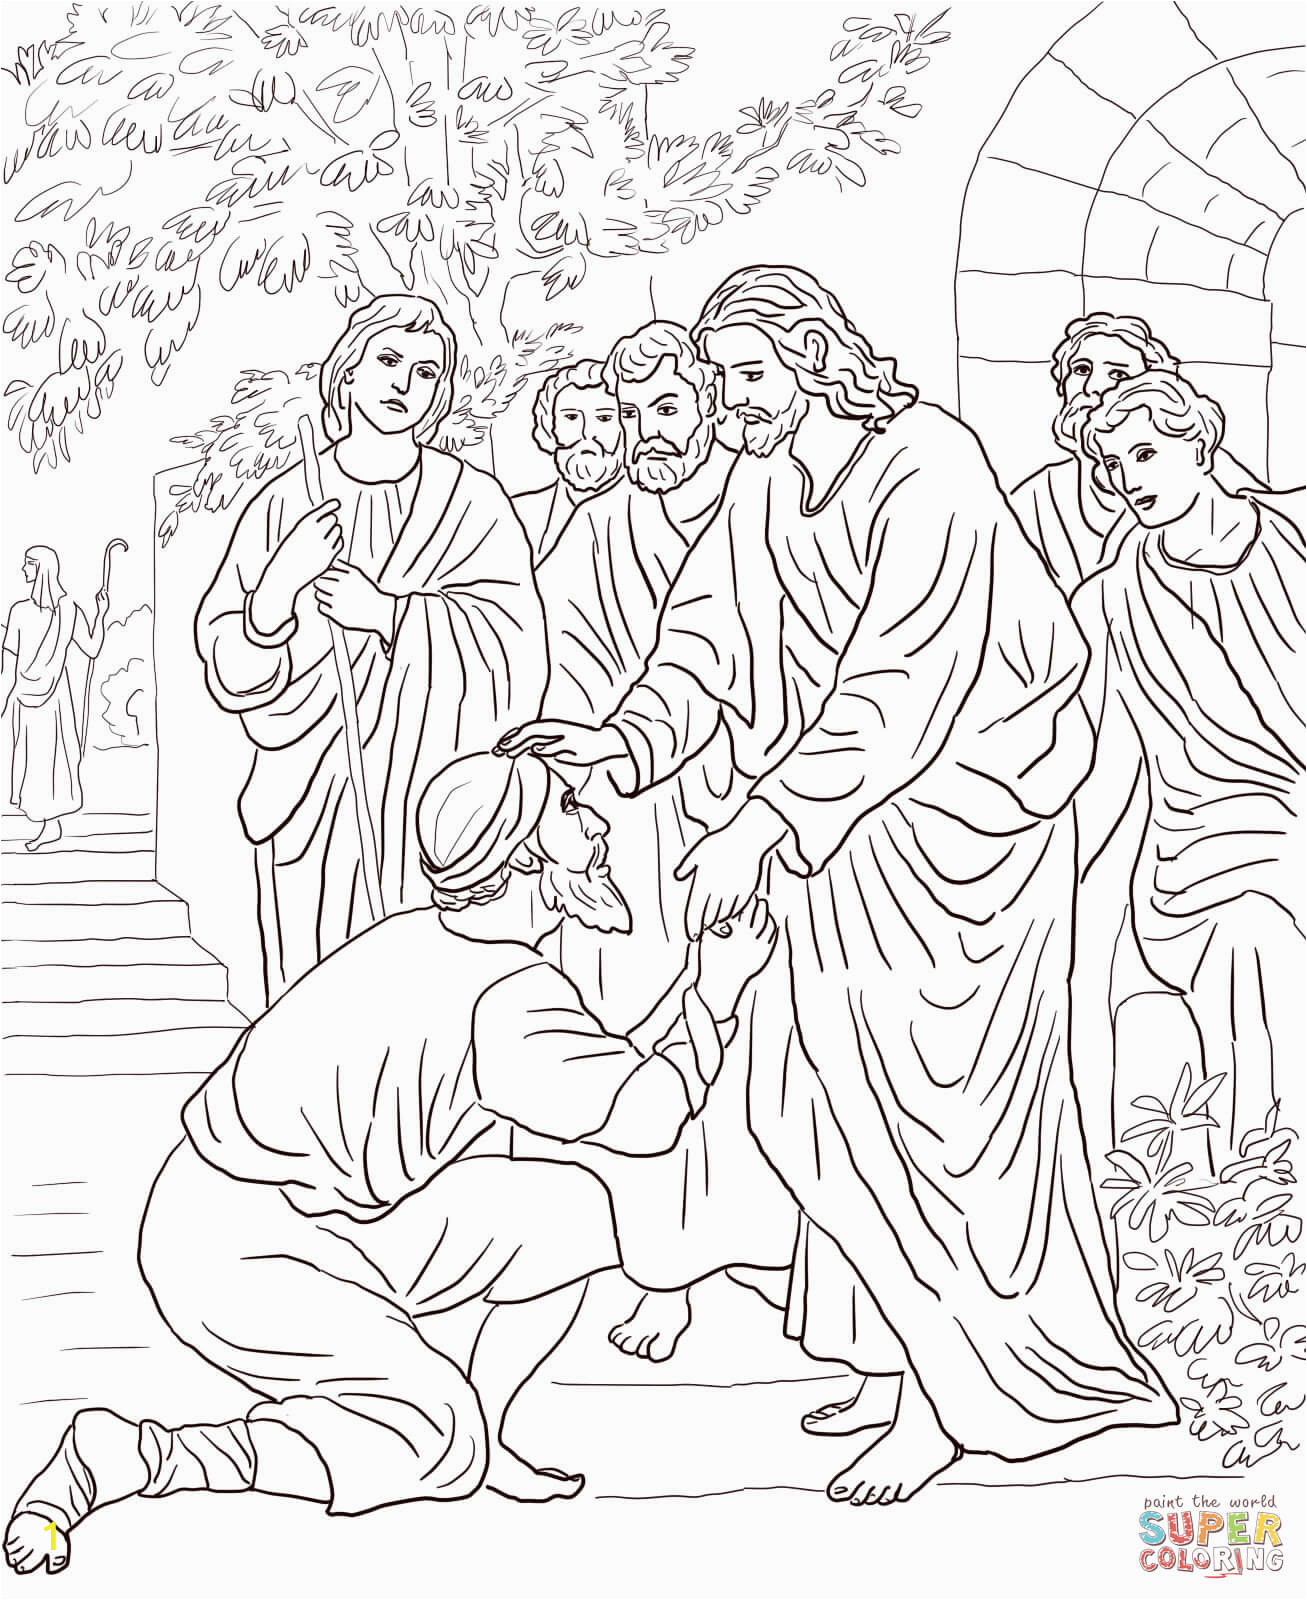 Jesus Heals 10 Lepers Coloring Page